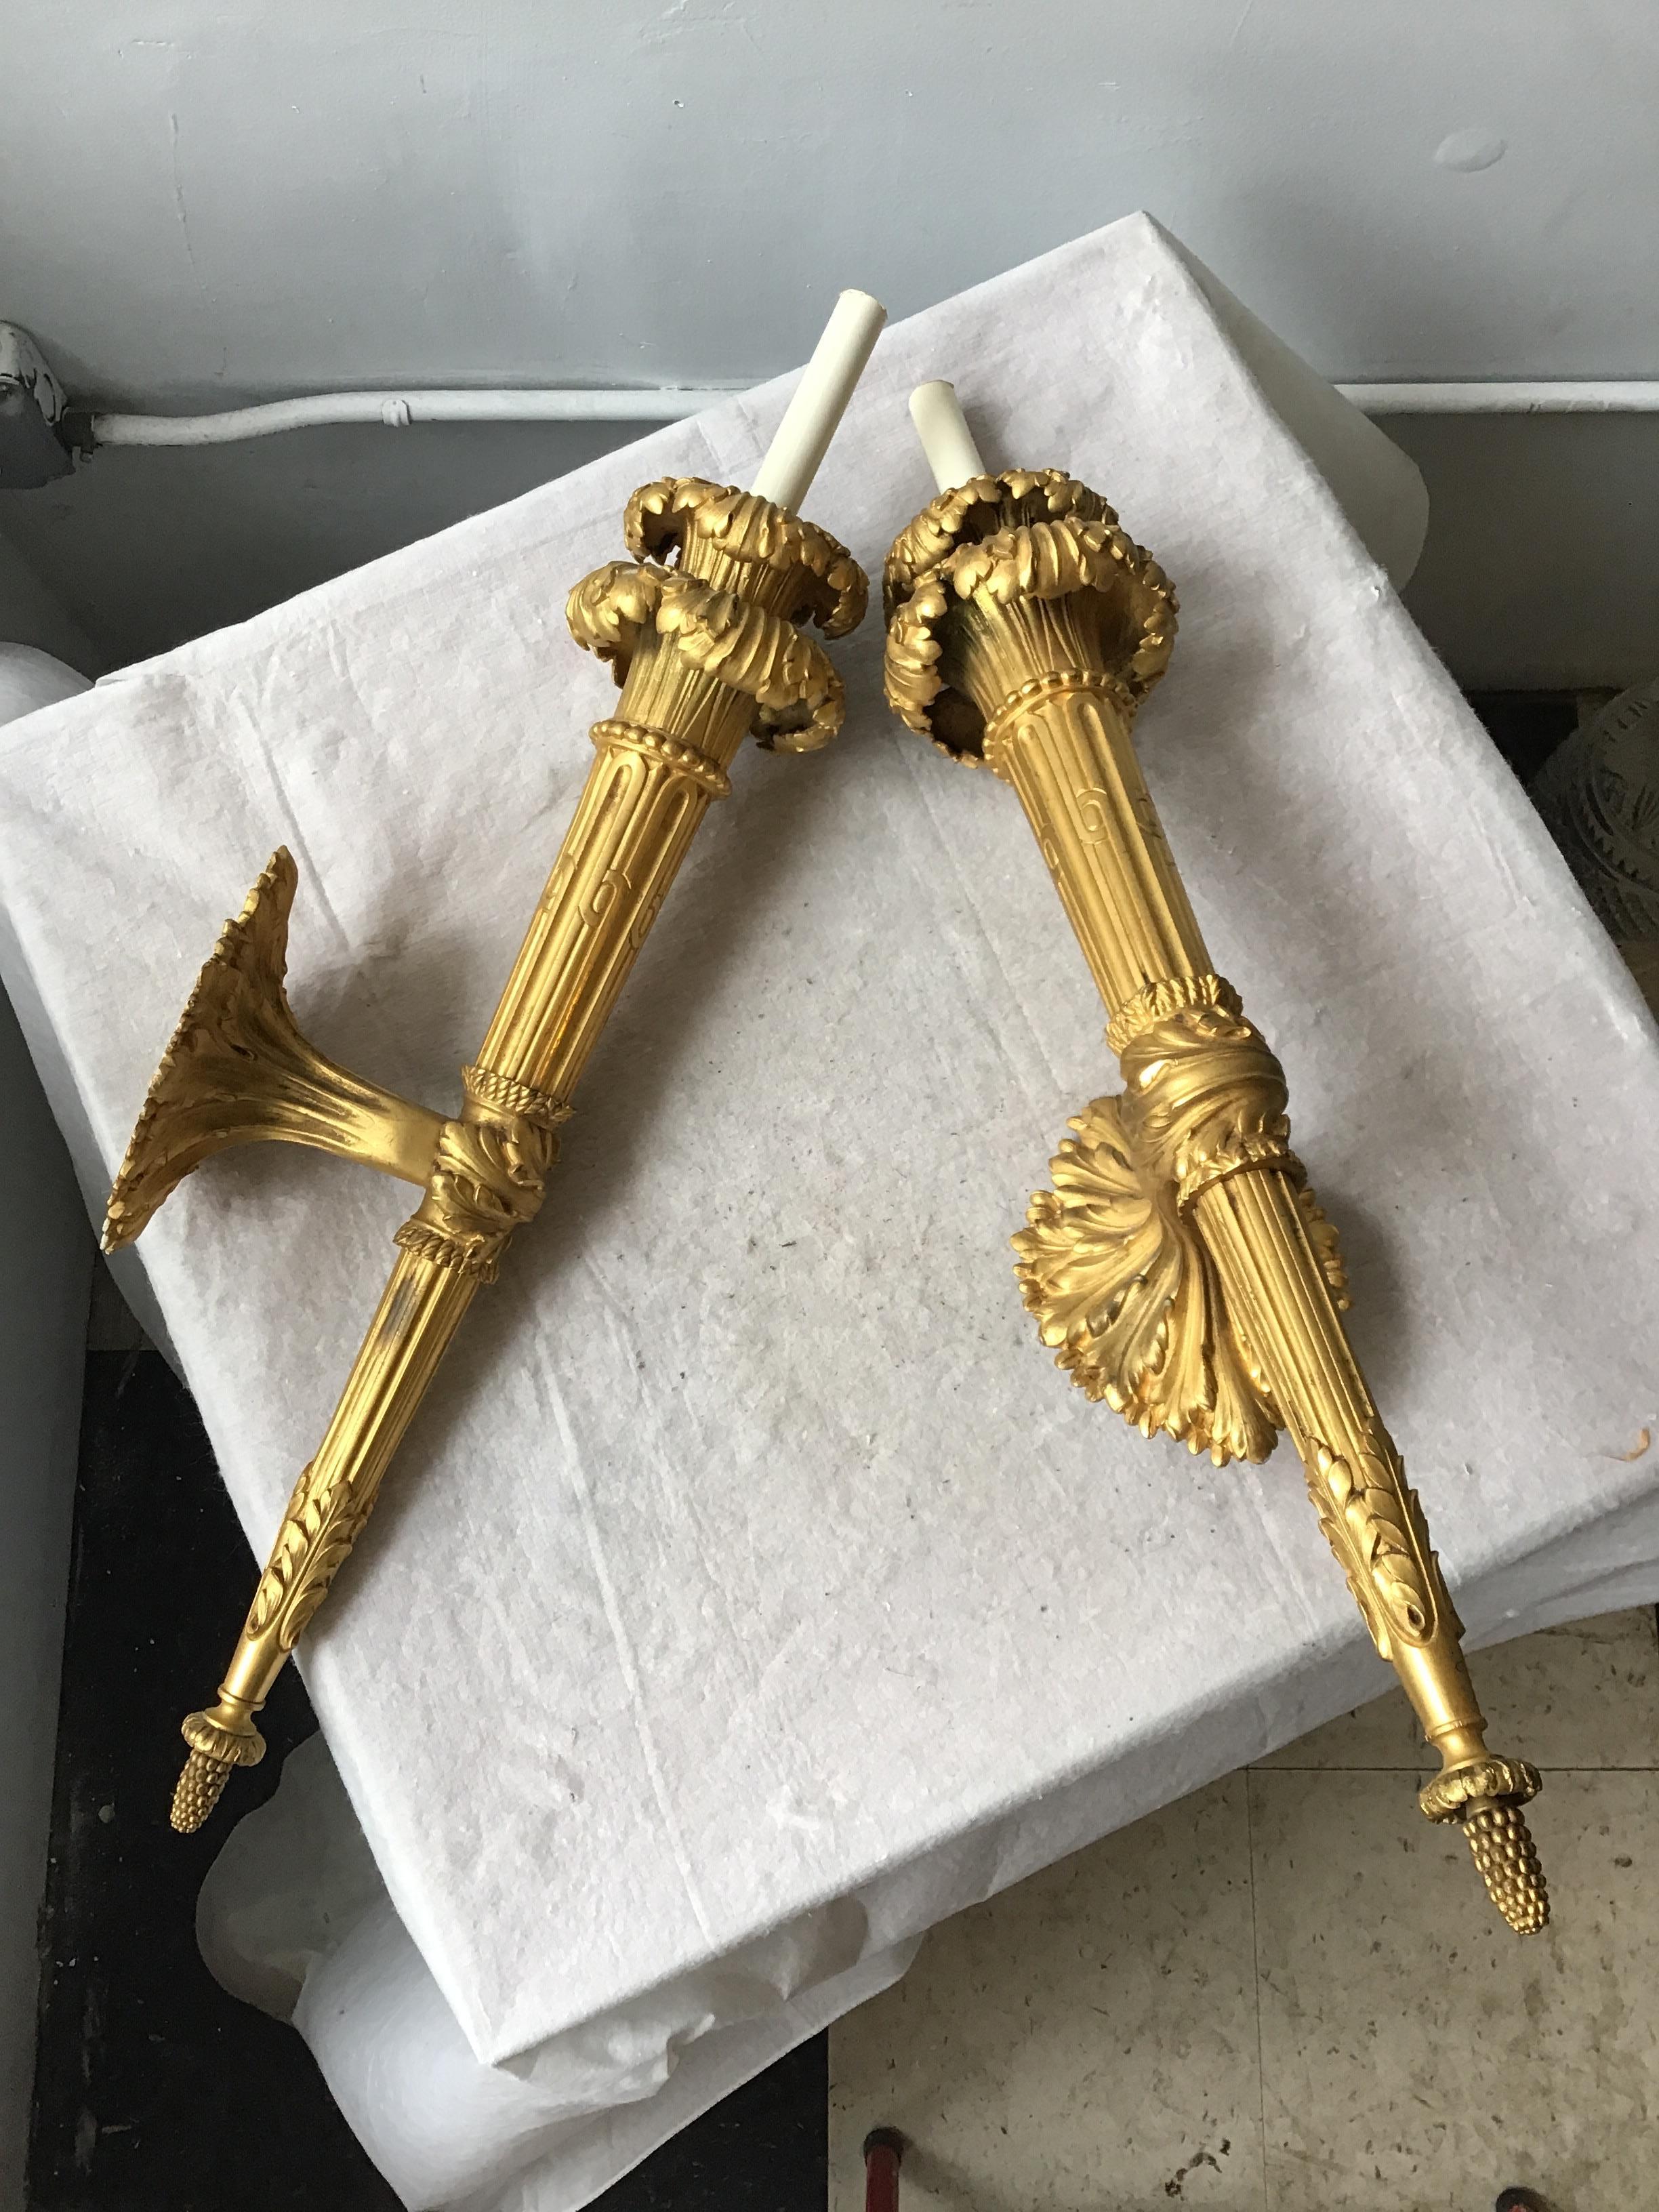 1860s French gilt bronze torch sconces. High quality. I don’t think the glass shades are original. They don’t fit in tightly to the sconce. They wiggle a little if touched.